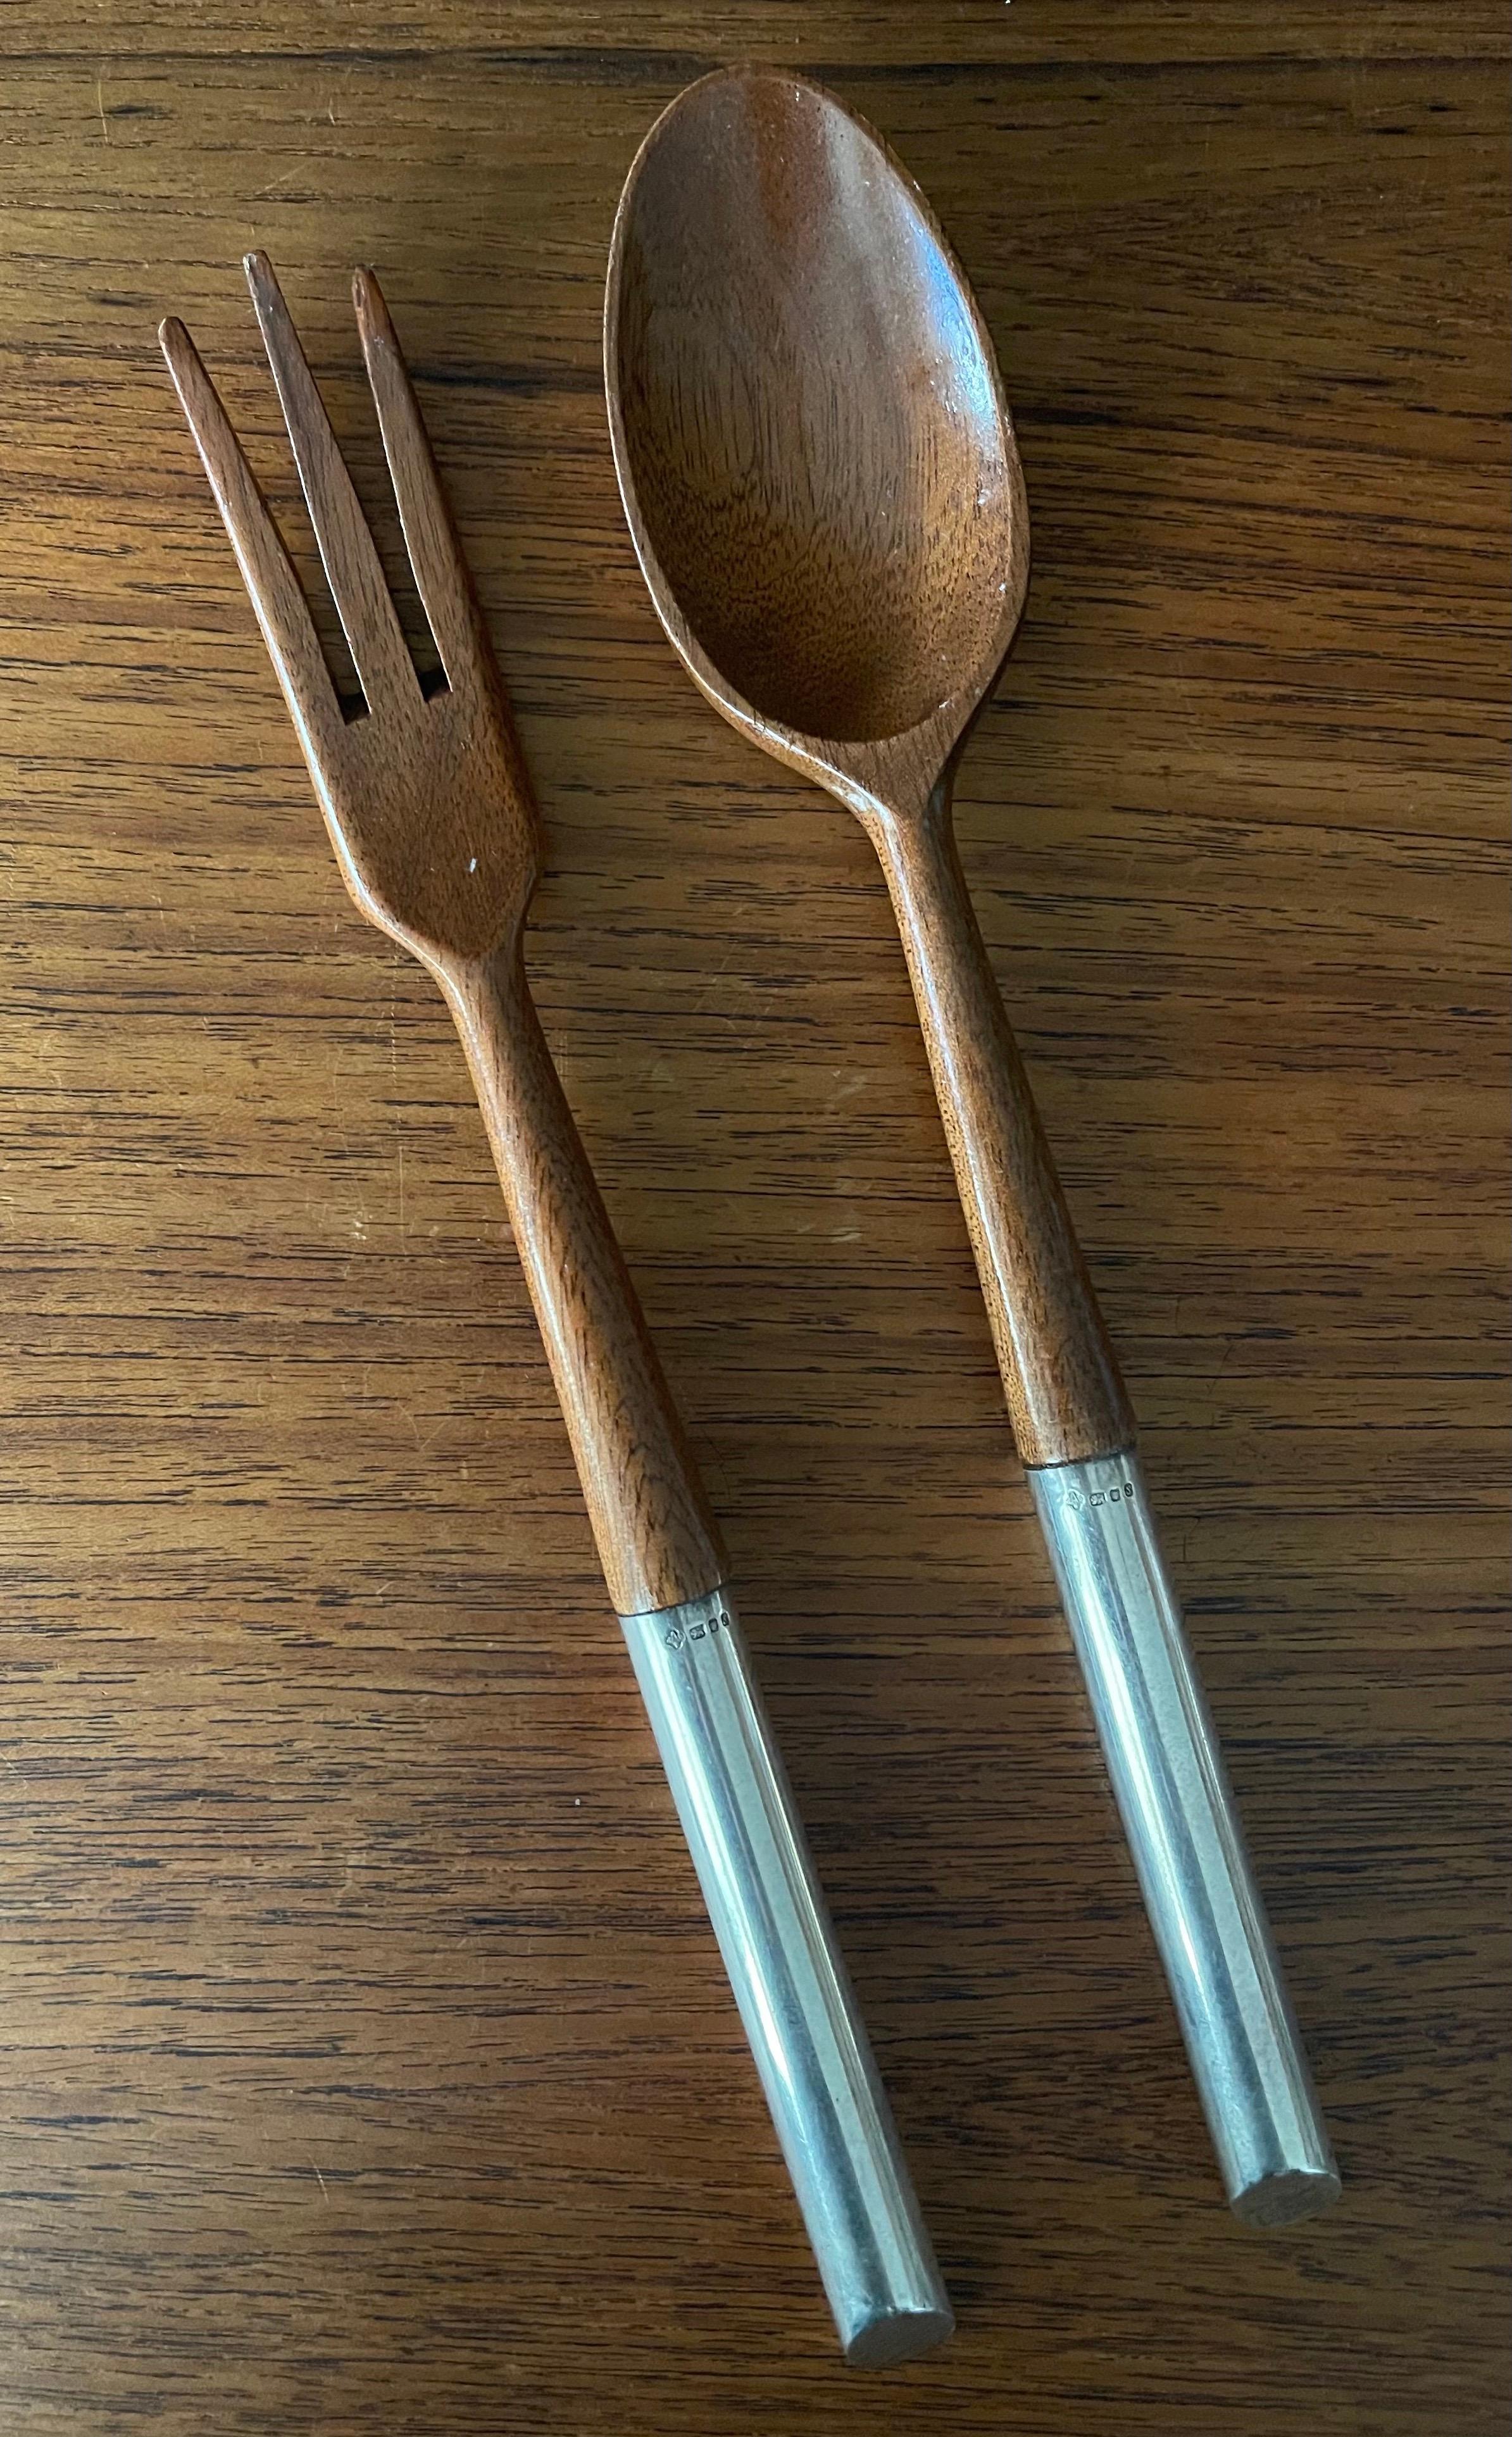 Pair of MCM walnut and sterling silver salad servers made in Italy, circa 1970s. The set is in very good vintage condition and would work great with a number of different kinds of salad bowls. The servers measure 11.5